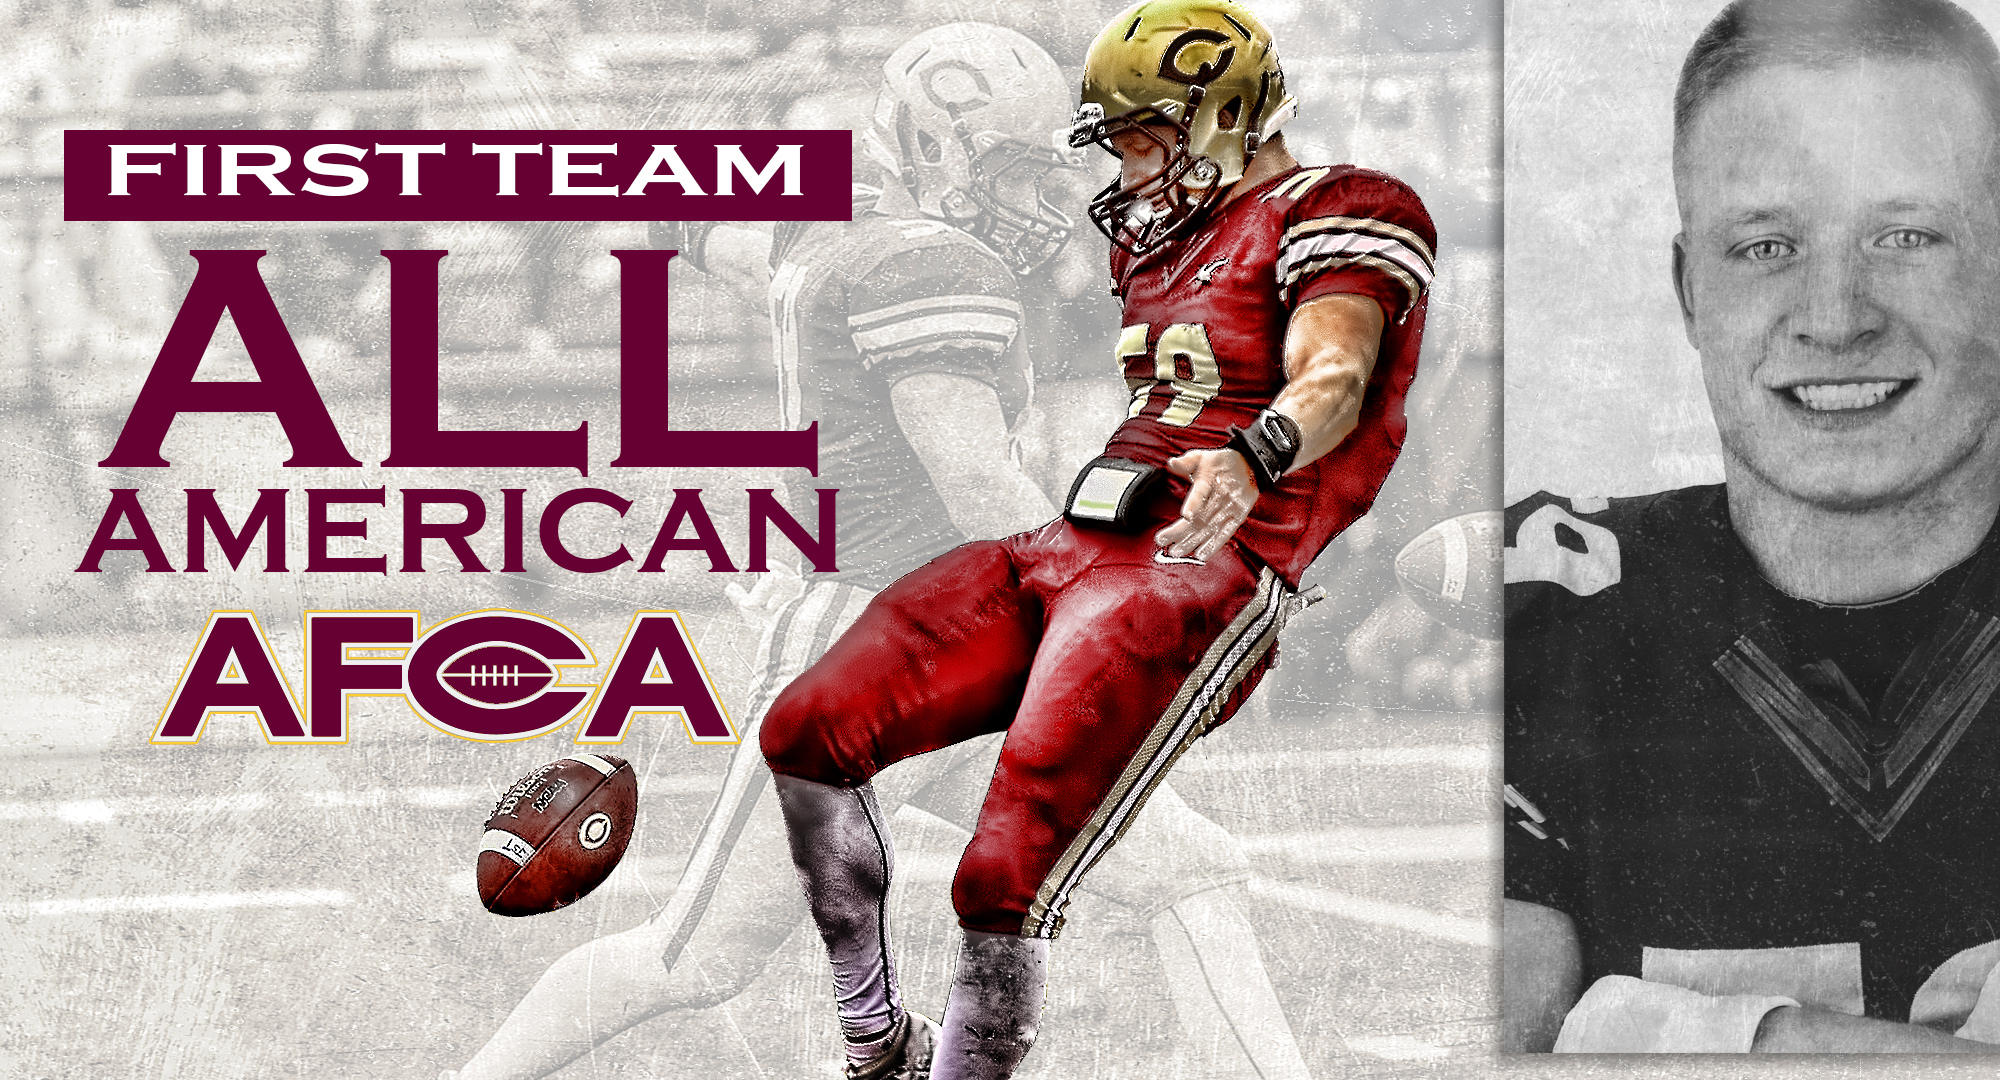 Senior Alex Berg was named to the AFCA All-American First Team. He is the seventh Cobber player in the history of the program to earn the honor.